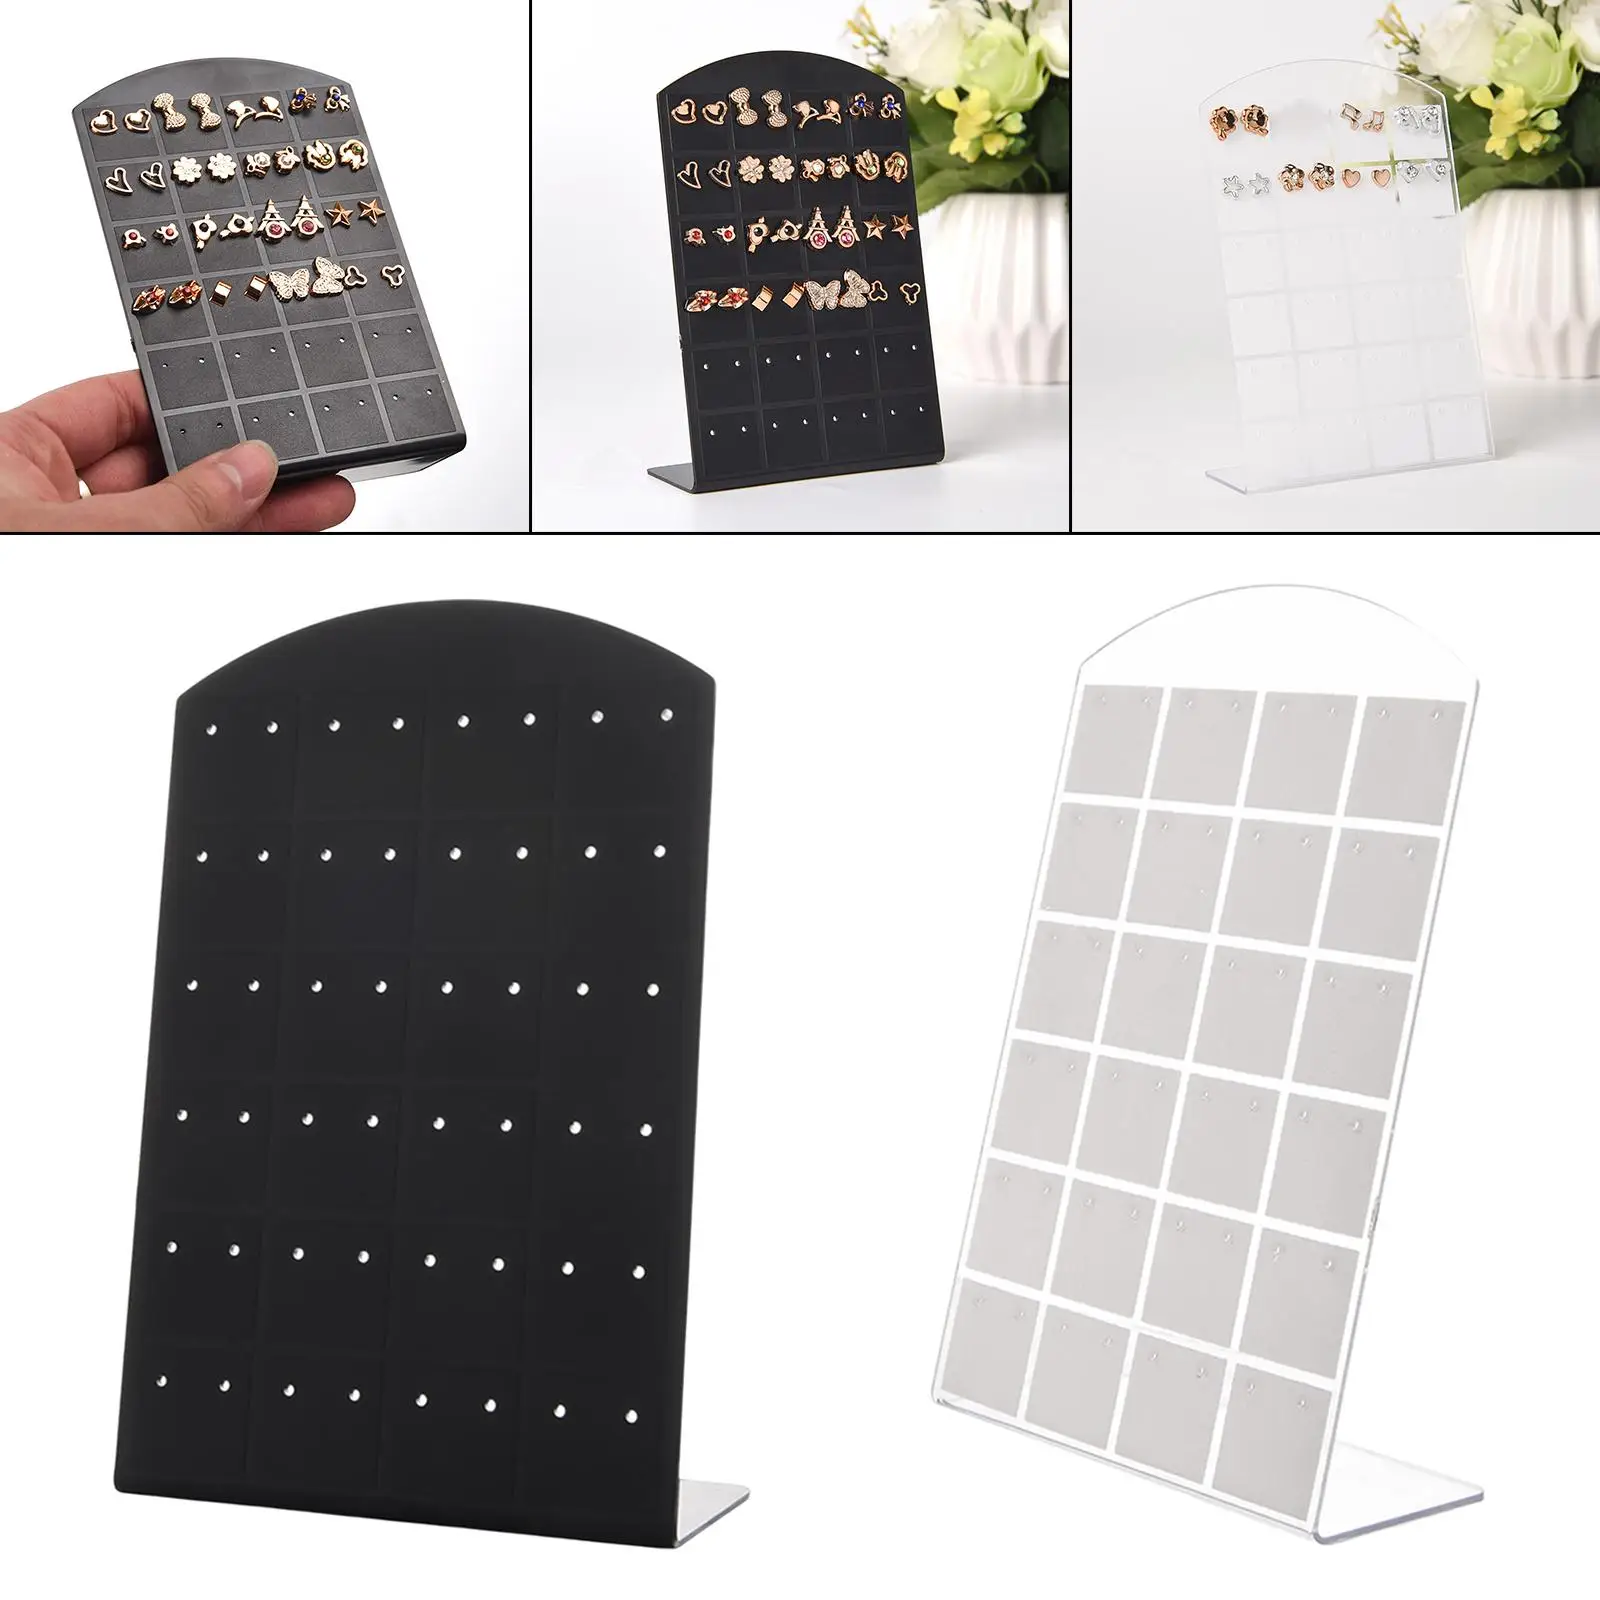 48 Holes Earrings Ear Studs Jewelry Show Display Rack Stand Organizer Holder Showcase Earrings Display for Retail Show Personal